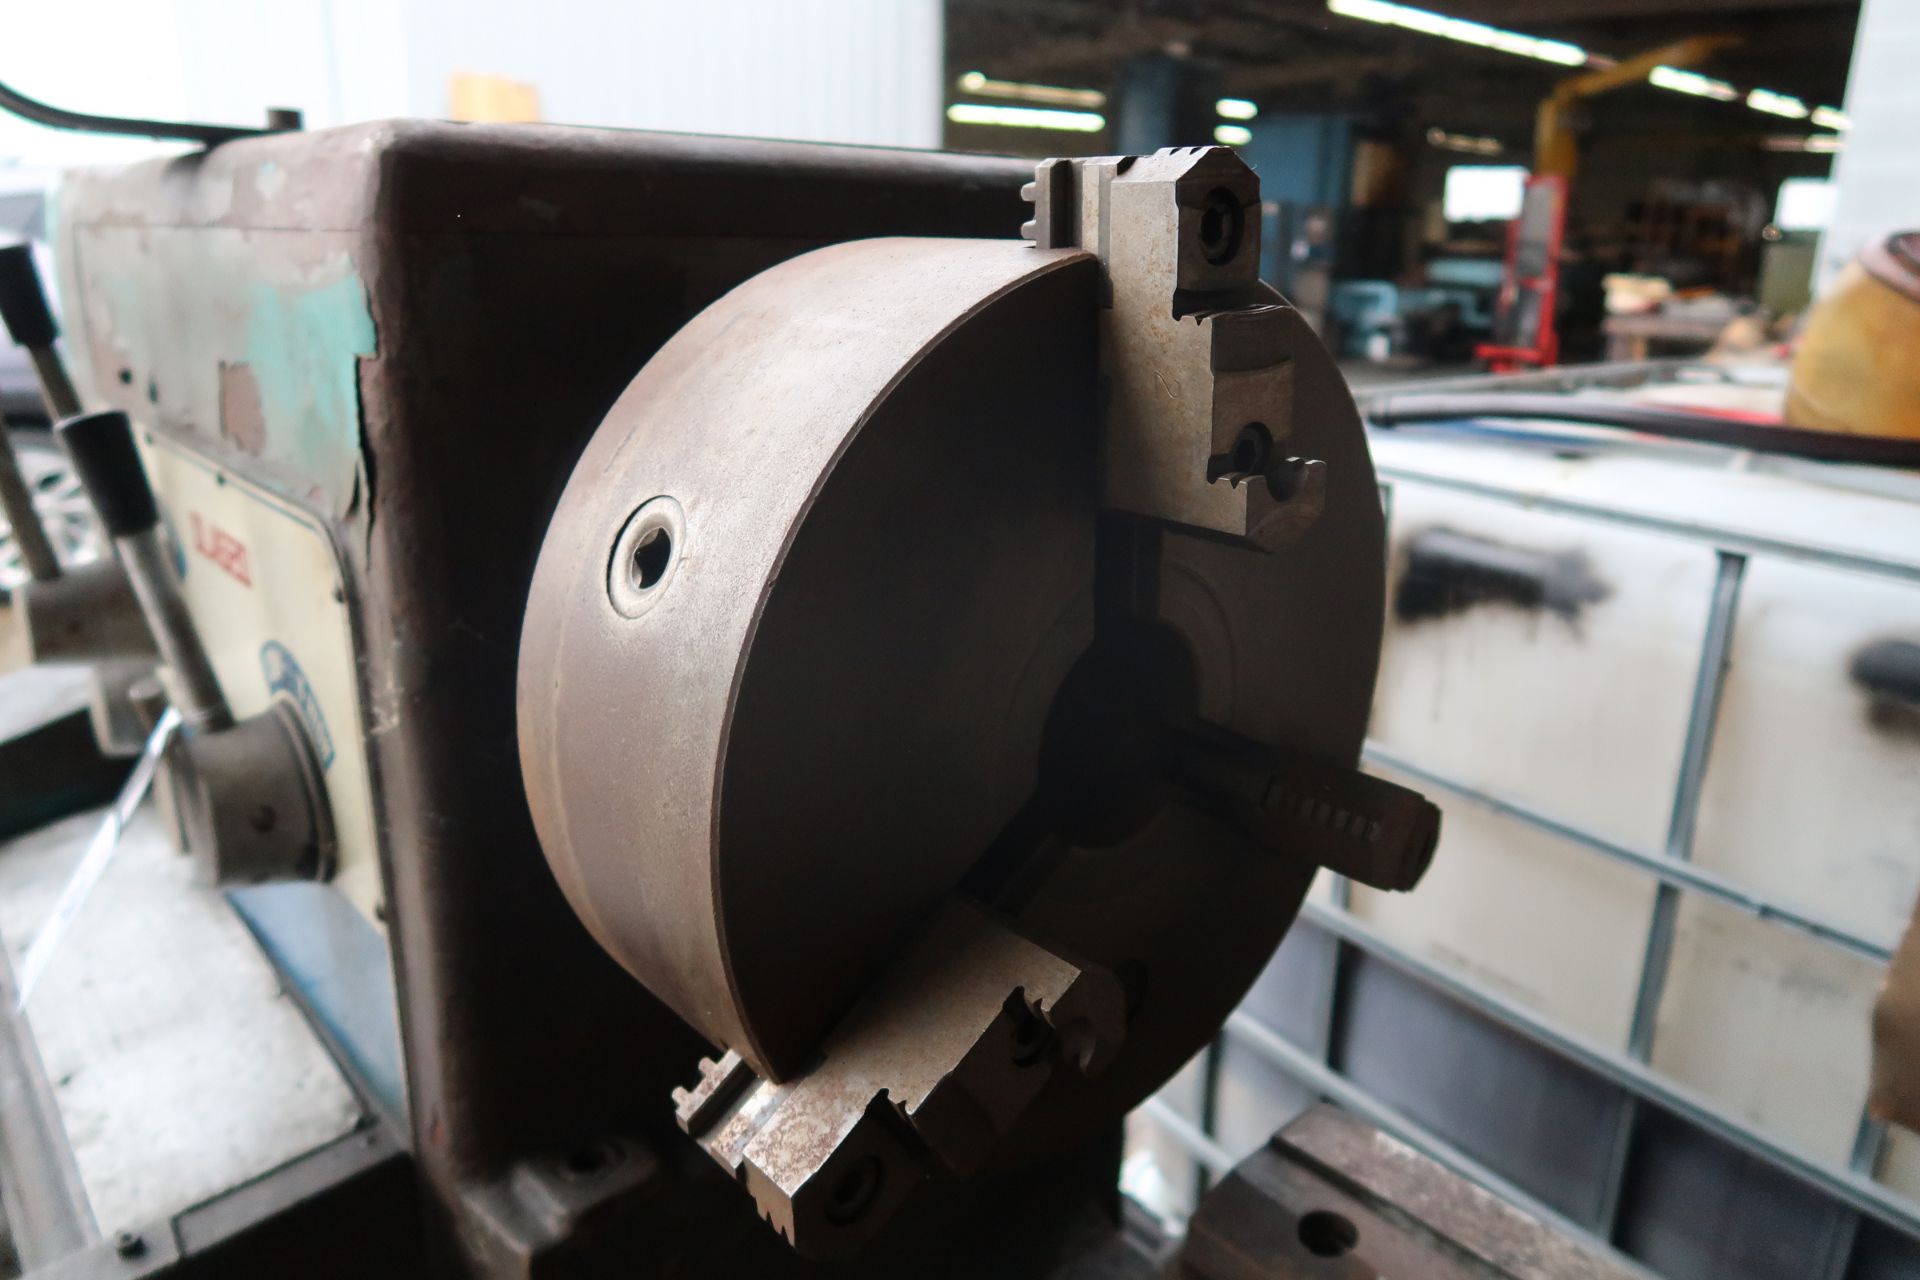 Gap Lathe 12.5" 3Jaw Chuck, Tail Stock Mod. DLA520 (SOLD AS-IS - NO WARRANTY) - Image 5 of 12